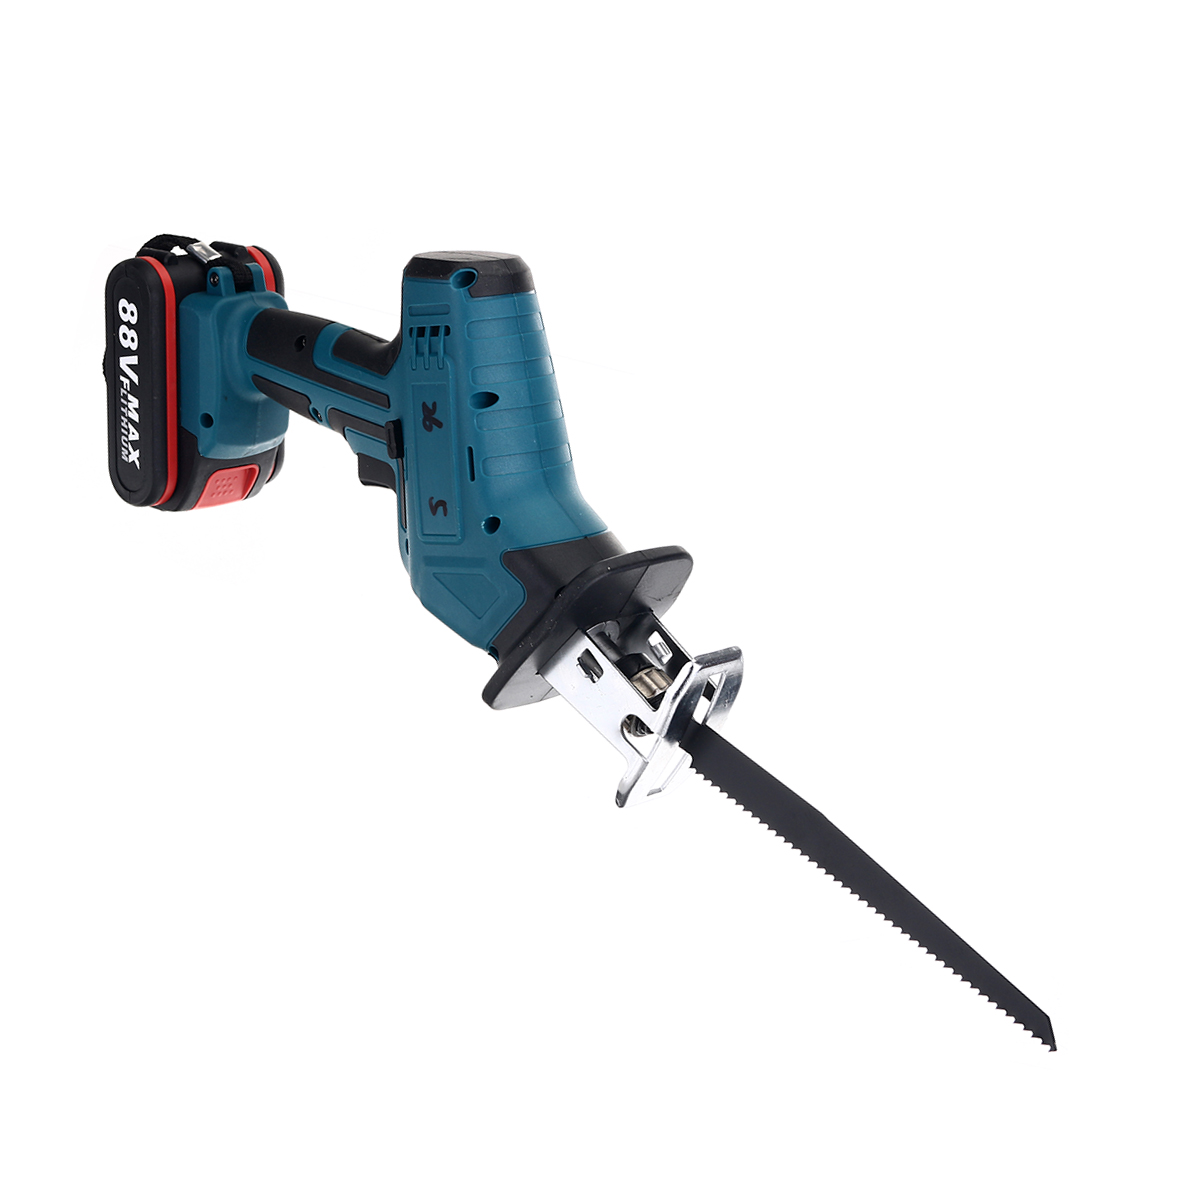 Cordless-Reciprocating-Saw-With-4-Blades--Battery-Rechargeable-Electric-Saw-for-Sawing-Branches-Meta-1684064-4